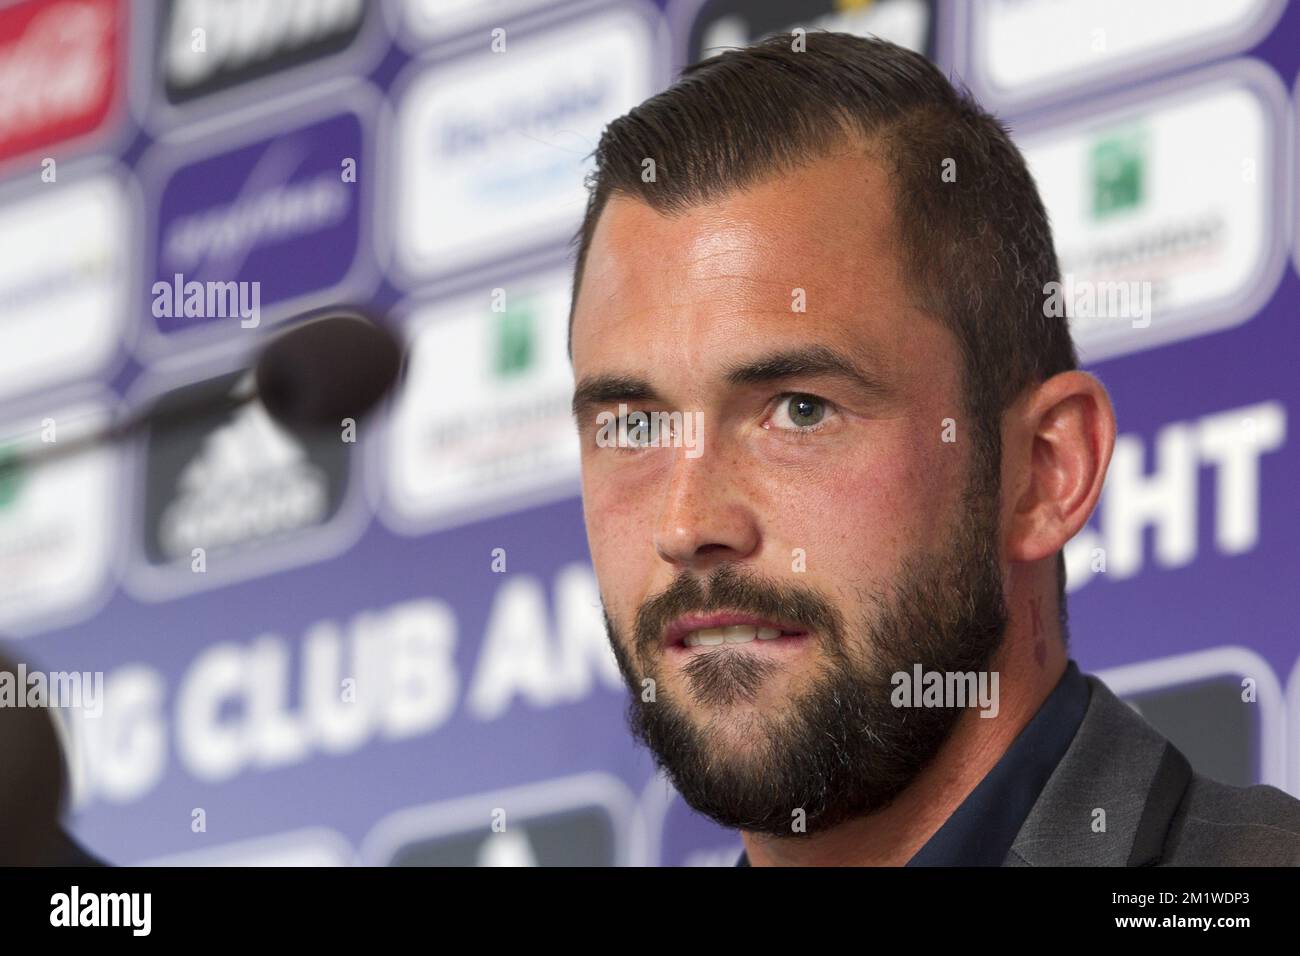 20140813 - BRUSSELS, BELGIUM: Anderlecht's new player Steven Defour pictured during a press conference of Belgian first division soccer team RSC Anderlecht to present their latest transfer, Wednesday 13 August 2014 in Brussels. Midfielder Steven Defour is coming over from Portuguese team F.C. Porto. BELGA PHOTO KRISTOF VAN ACCOM Stock Photo